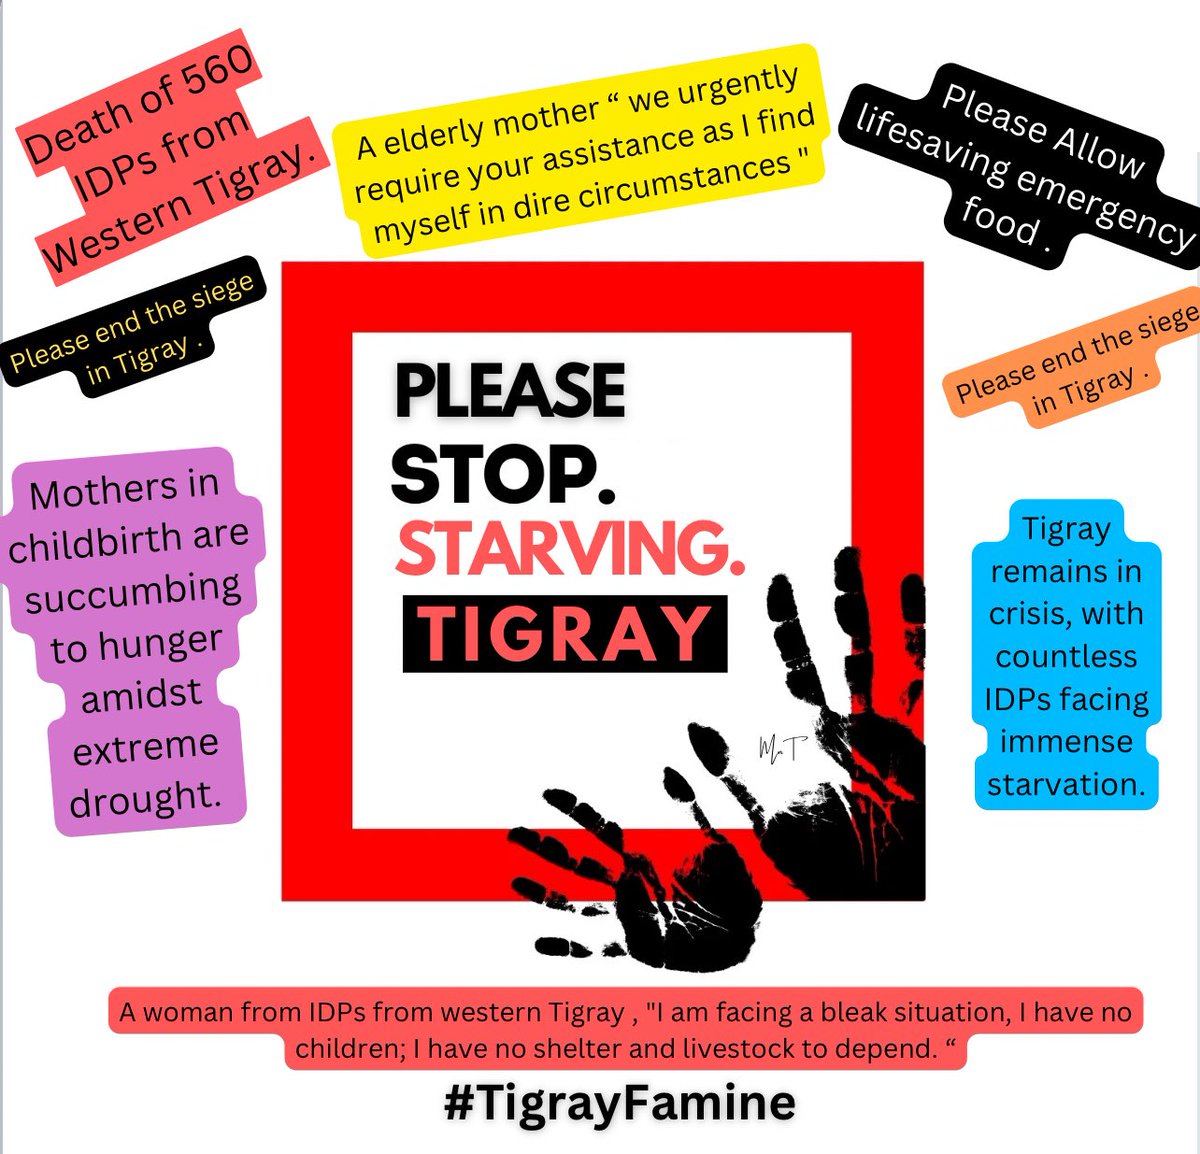 The #Tigray genocide’s aftermath, compounded by drought, demands immediate humanitarian intervention. 

#TigrayFamine #Aid4Tigray #AUSummit @EU_UNGeneva @_AfricanUnion @EUatUN @USAID @Refugees @PowerUSAID @BradSherman @David_Cameron @JustinTrudeau @USAIDSavesLives @ICRC_dc @hrw